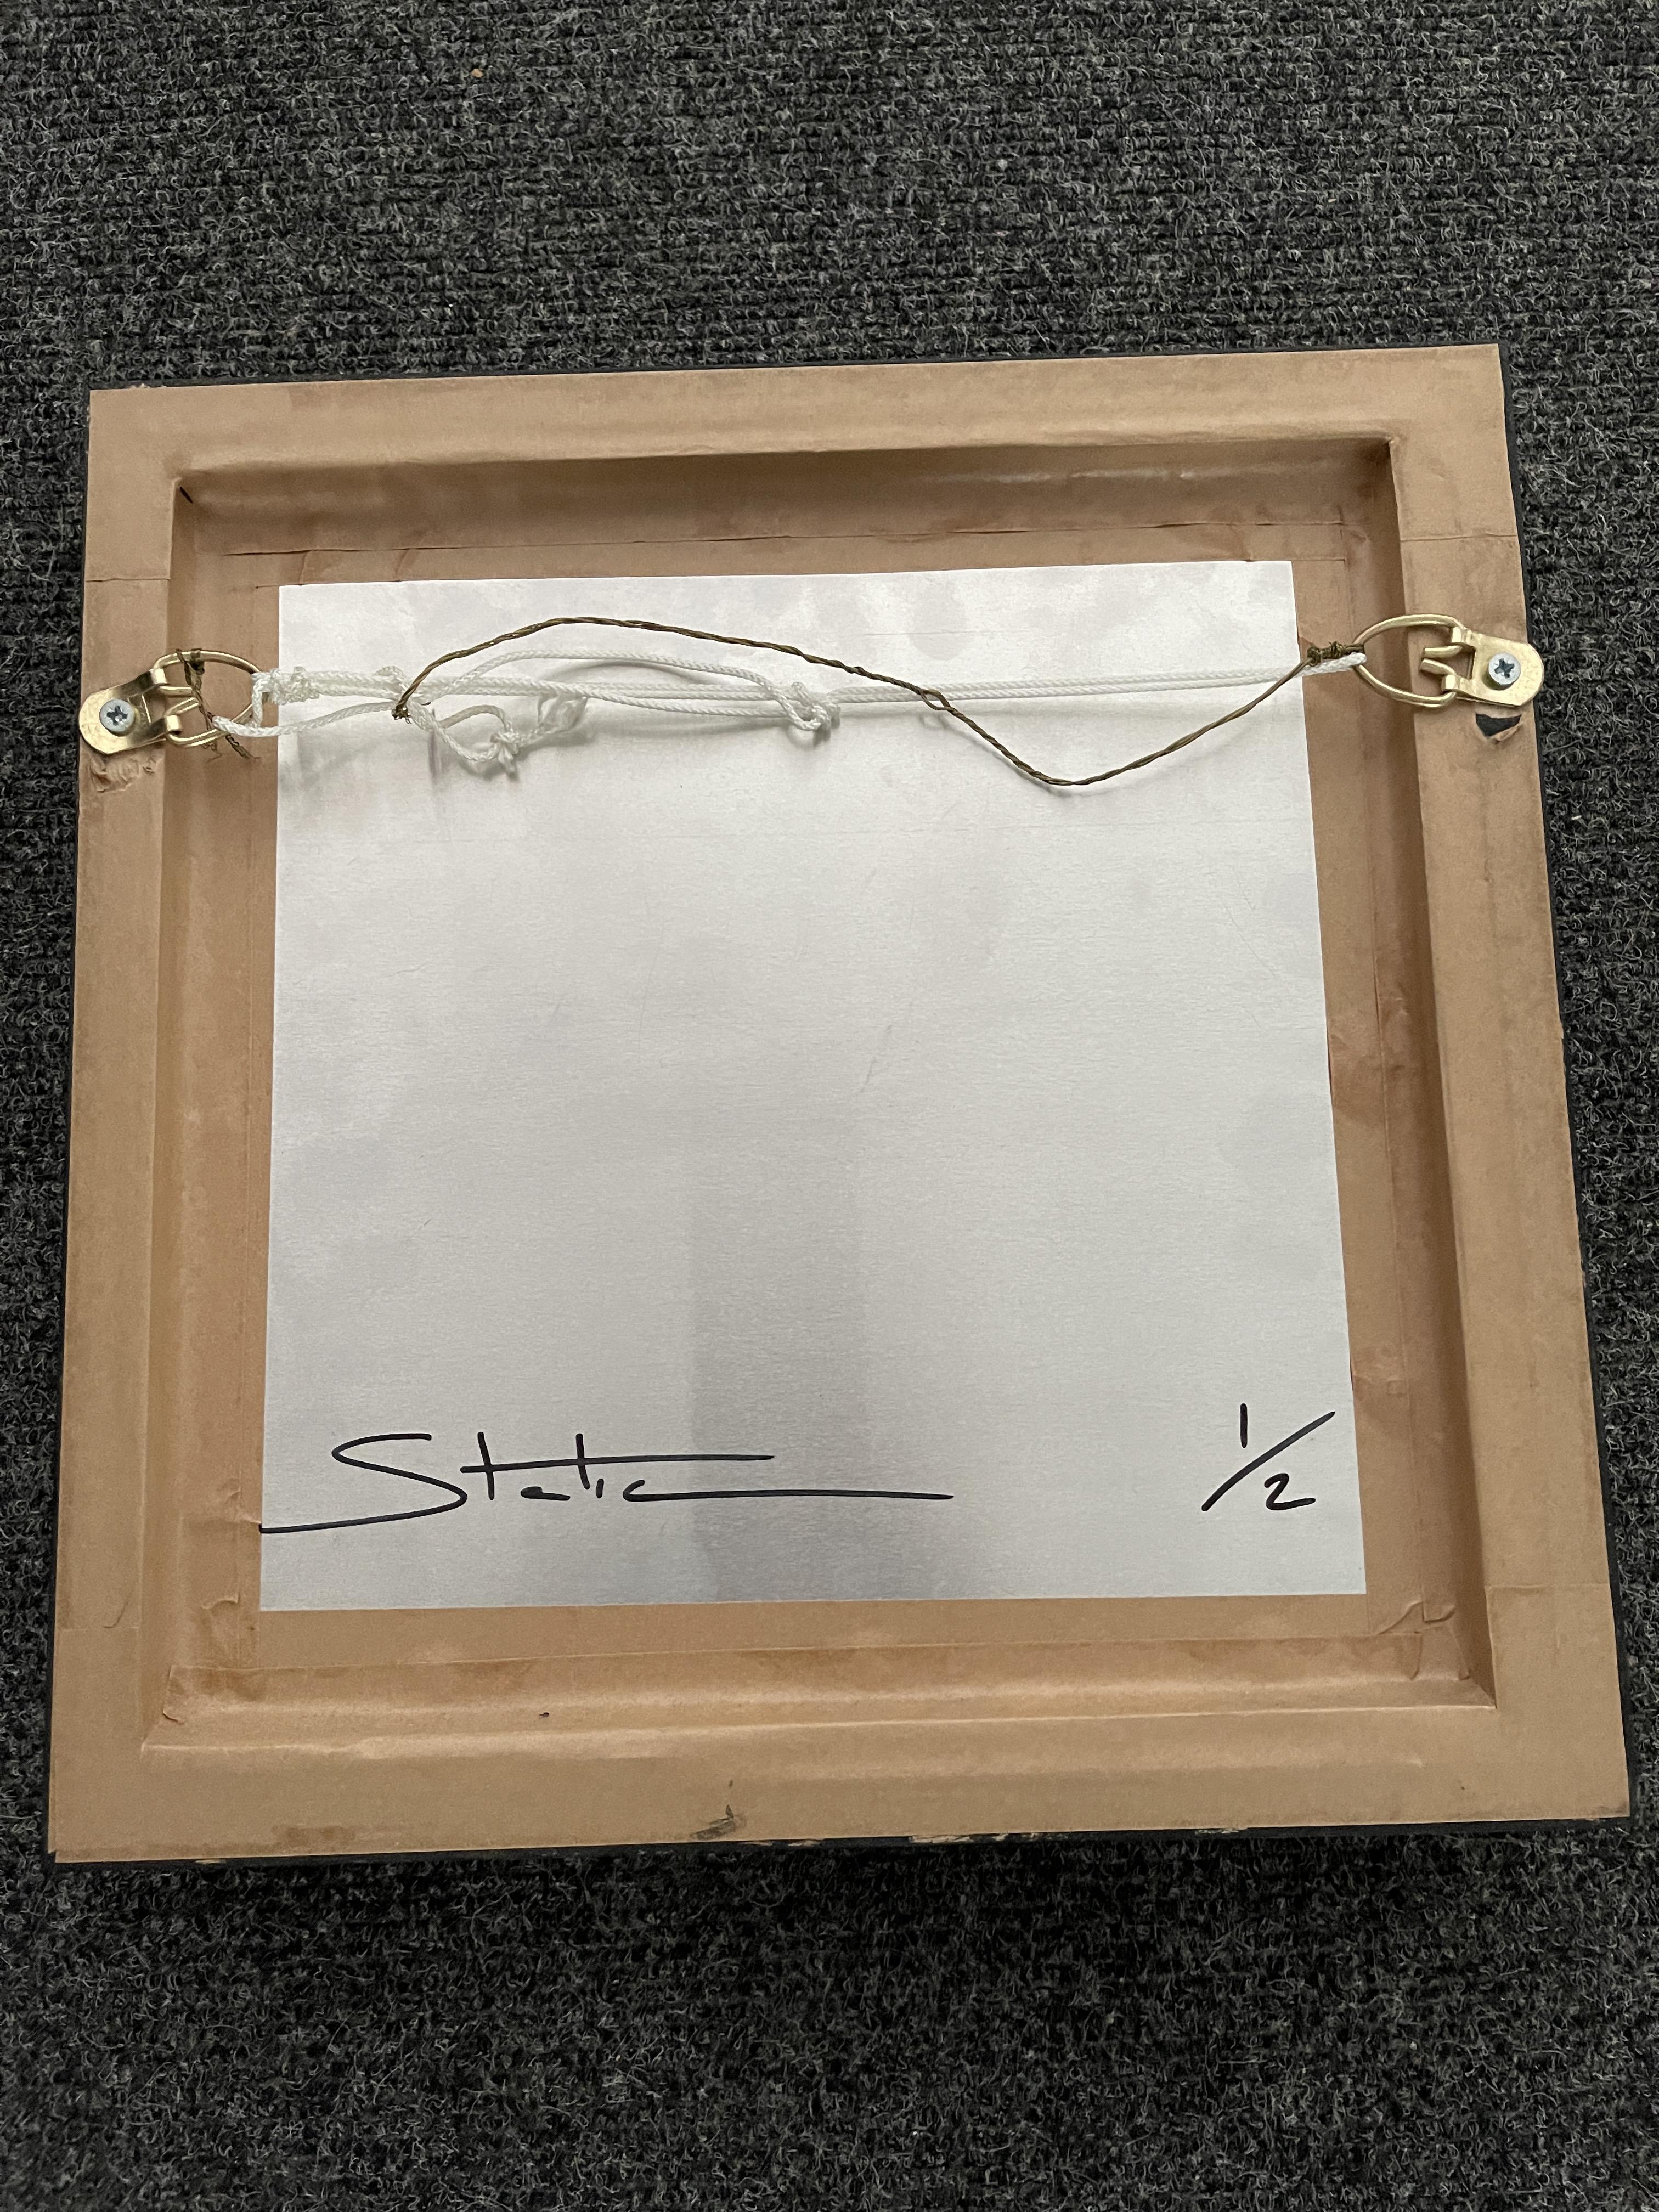 3D Artwork signed ""Static"" 1/2 (one of two). - Image 10 of 12